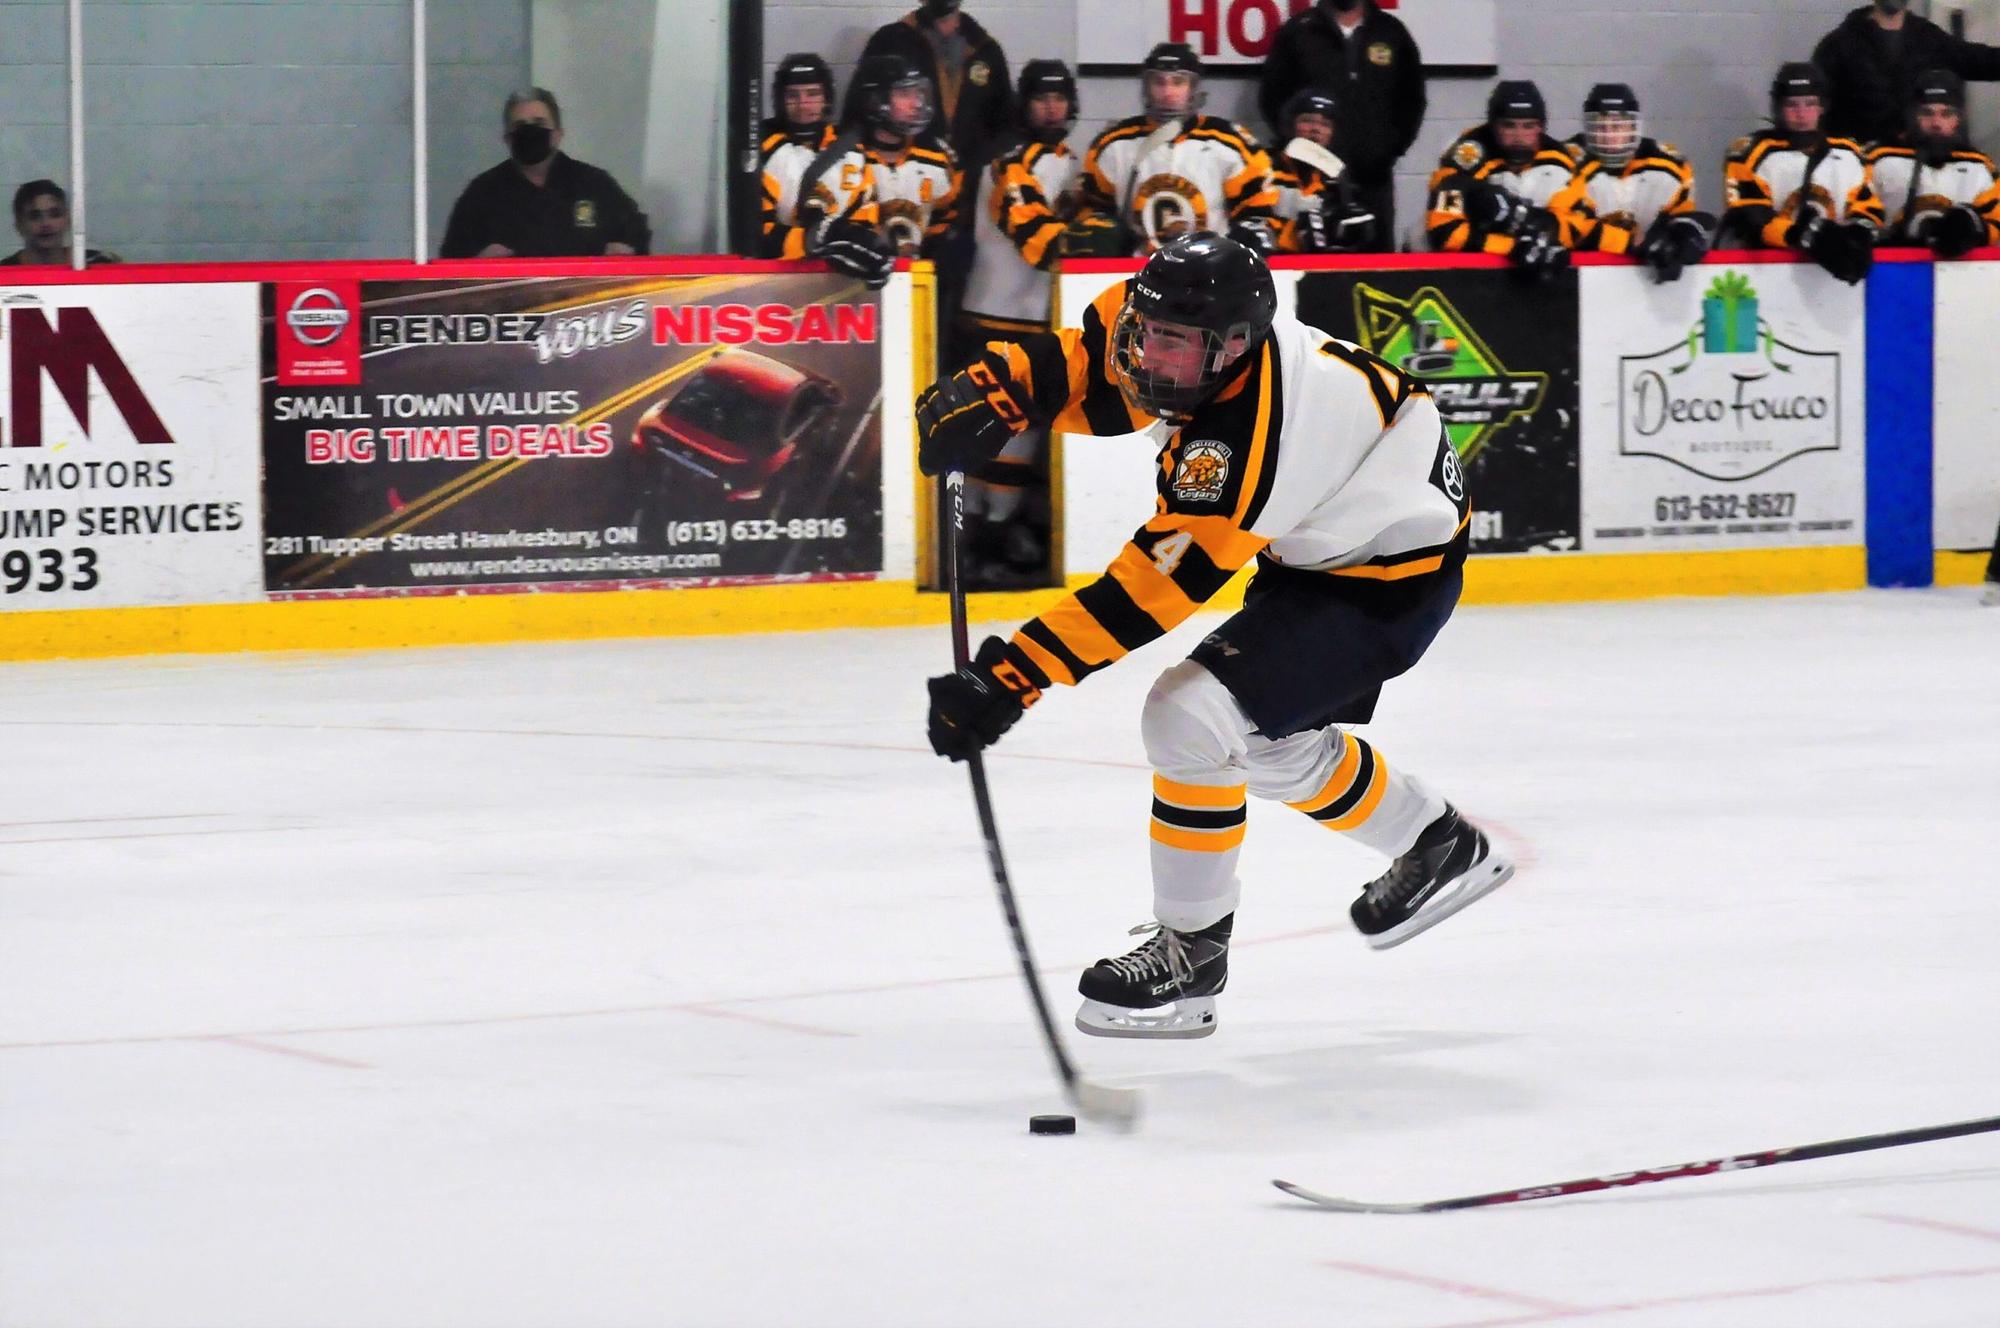 Cougars moving up in NCJHL standings after pair of weekend wins